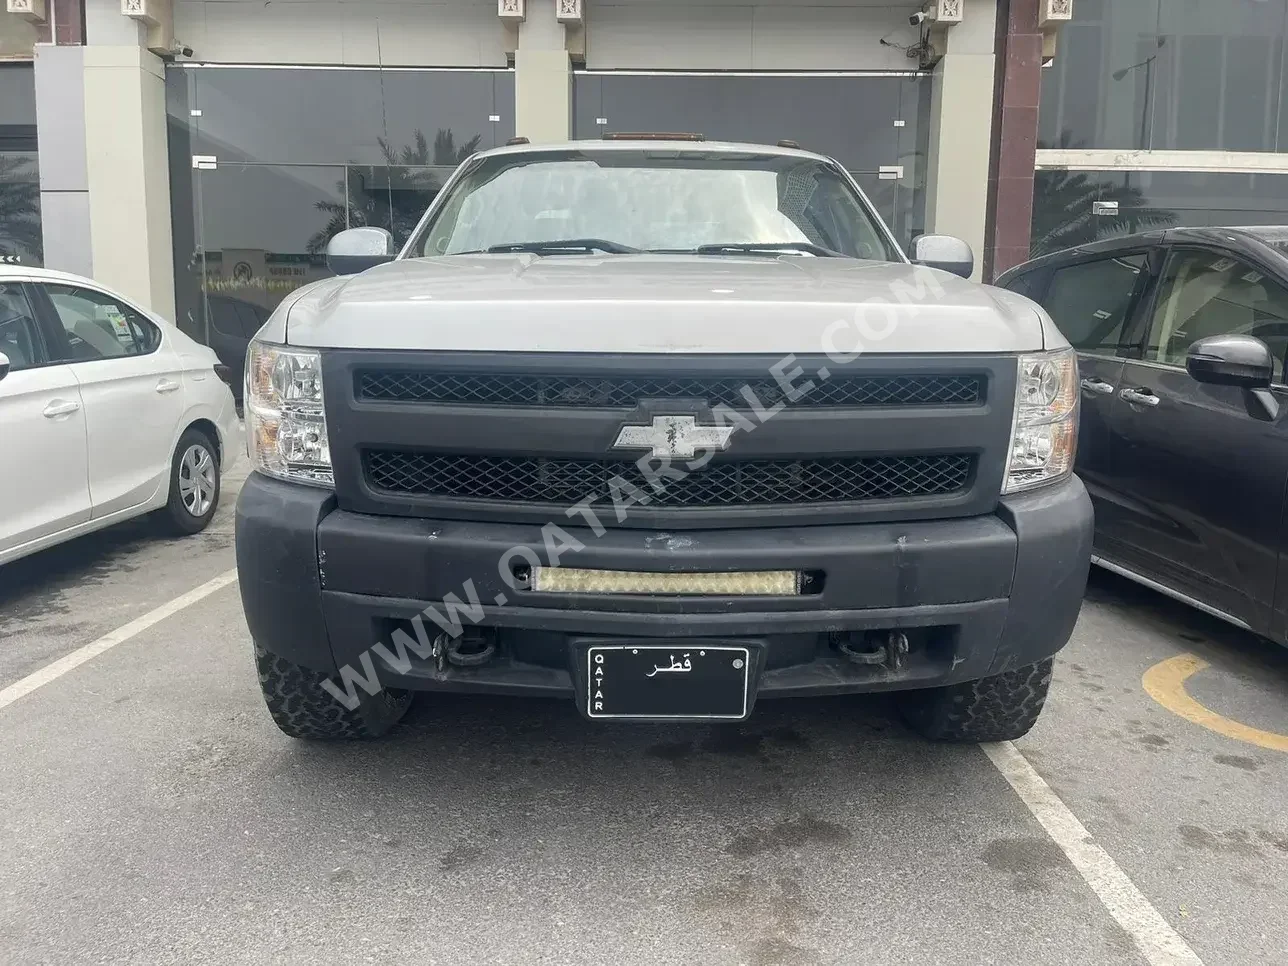 Chevrolet  Silverado  2011  Automatic  250,000 Km  8 Cylinder  Four Wheel Drive (4WD)  Pick Up  Gray